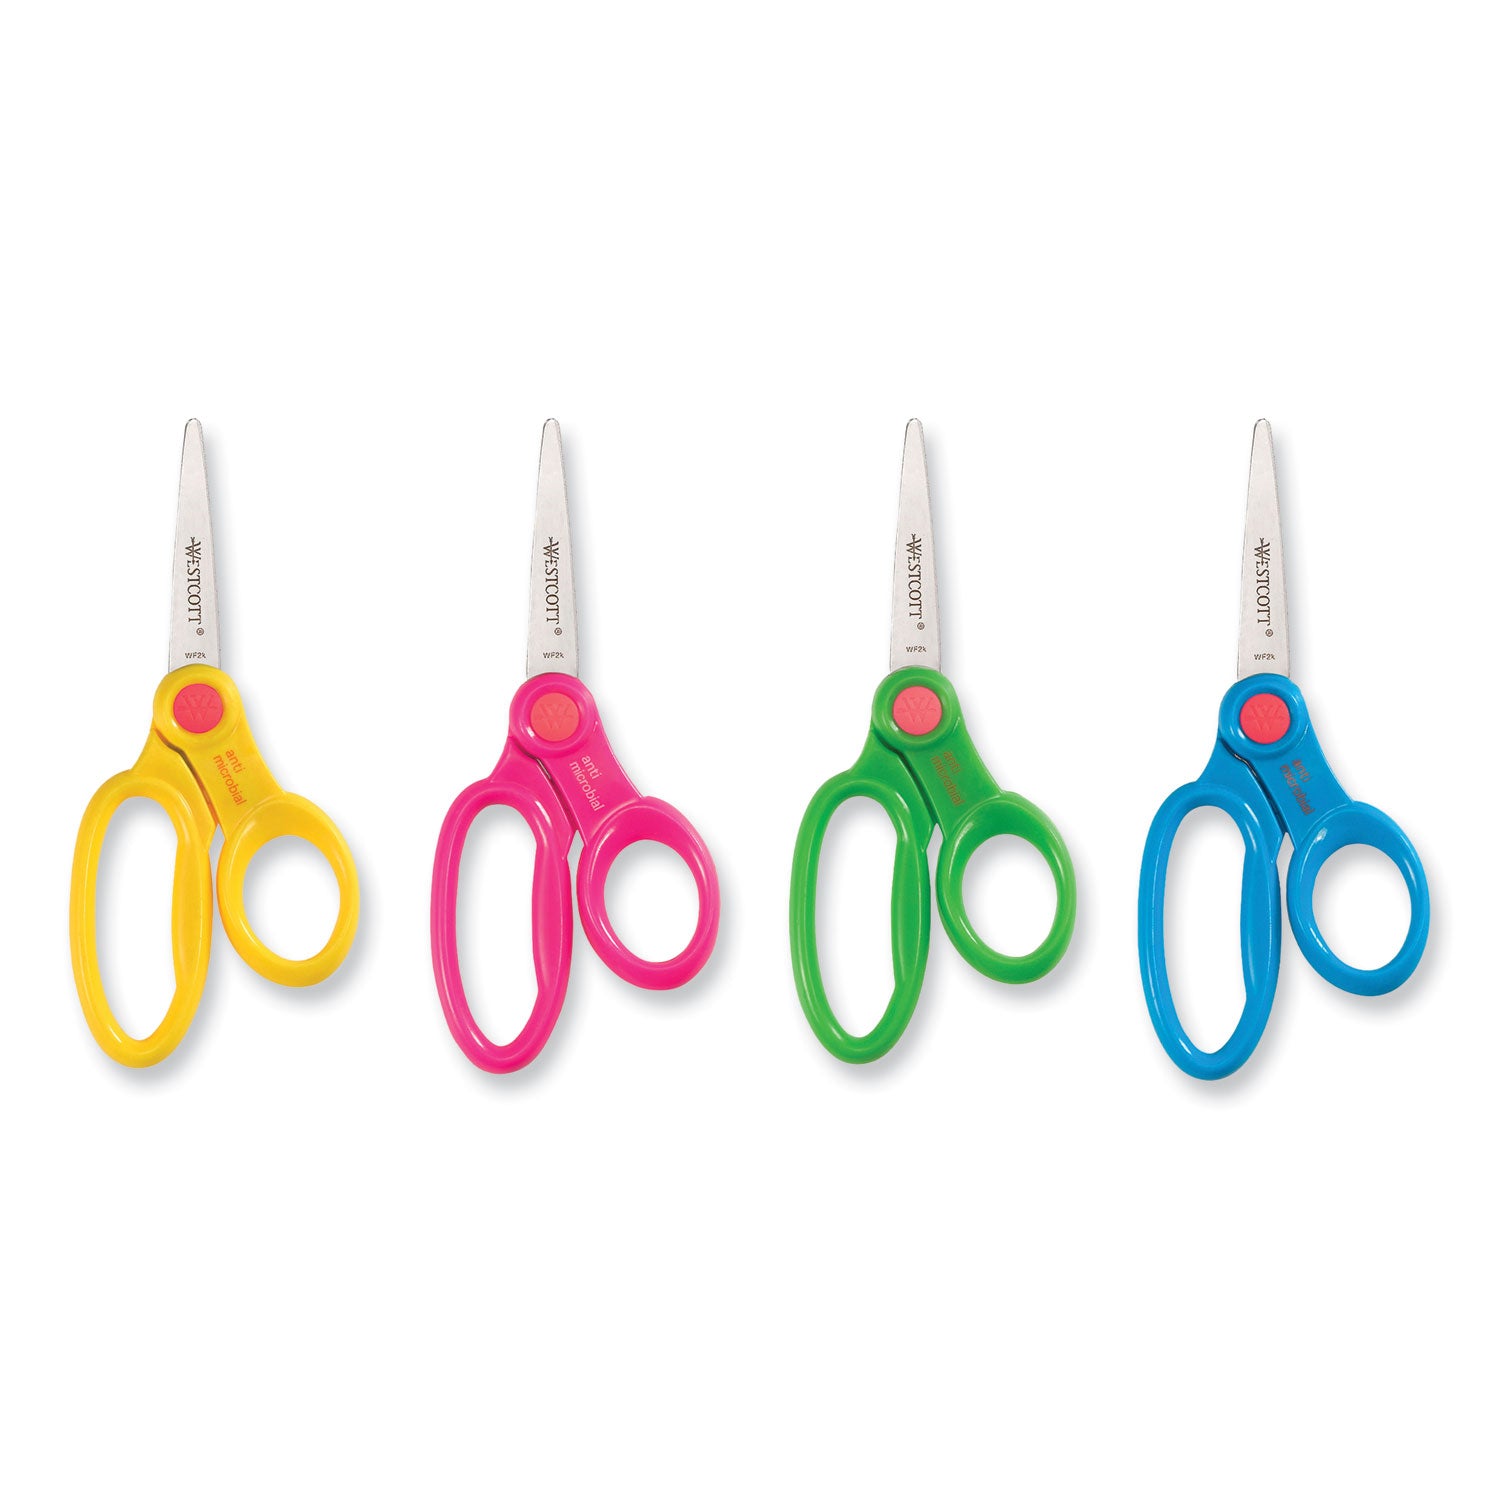 Kids' Scissors with Antimicrobial Protection, Pointed Tip, 5" Long, 2" Cut Length, Randomly Assorted Straight Handles - 